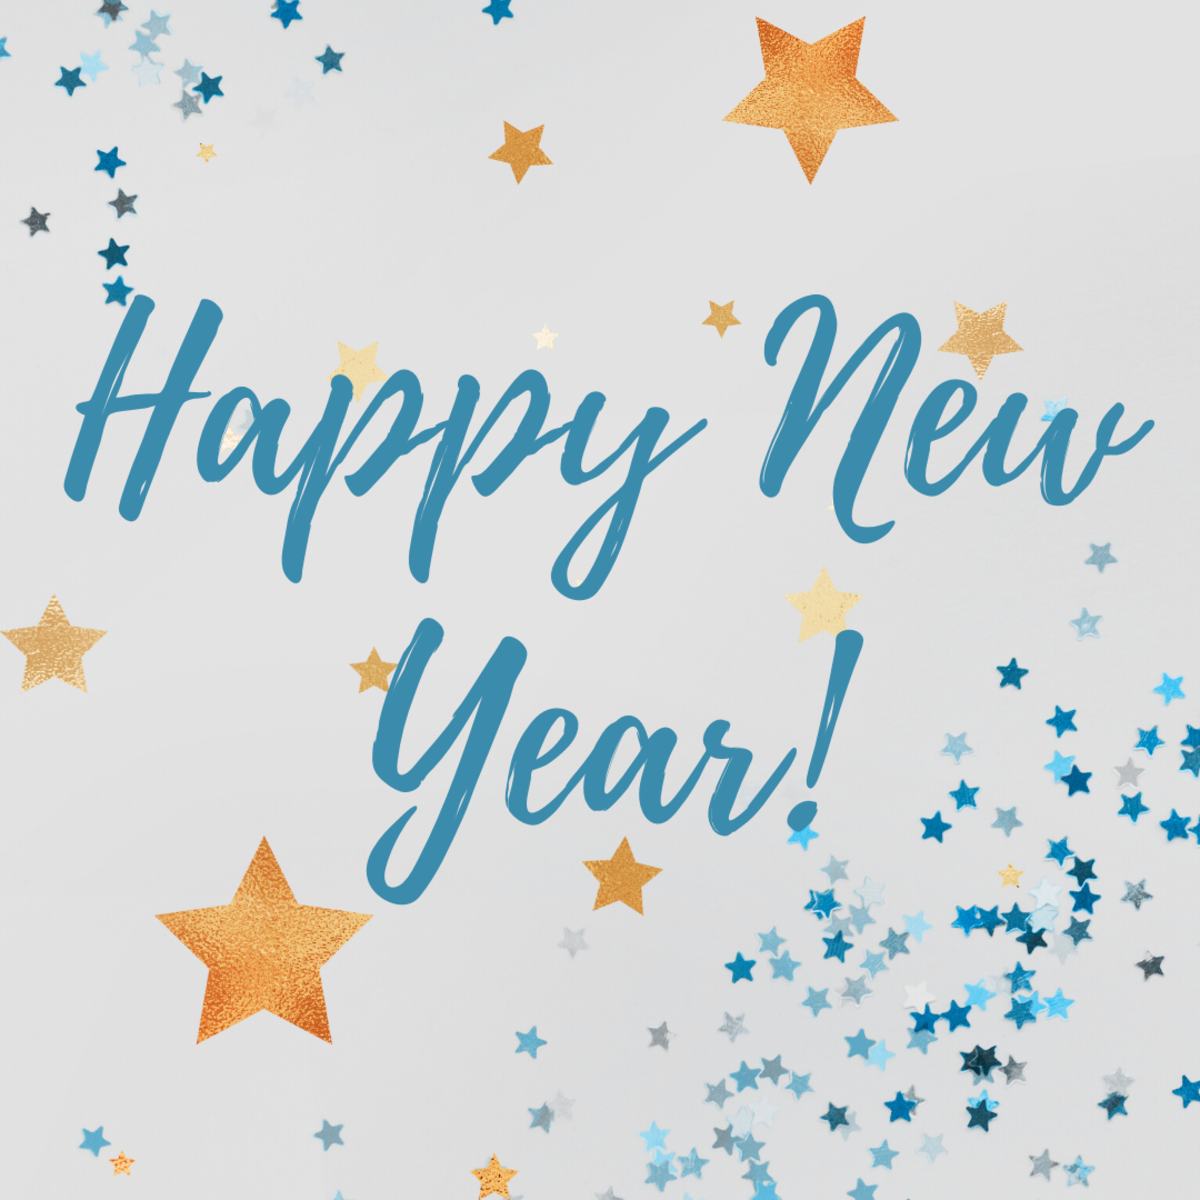 The holiday season marks the end of one year and the transition to the next. Here are some professional messages to wish clients or coworkers a happy New Year!